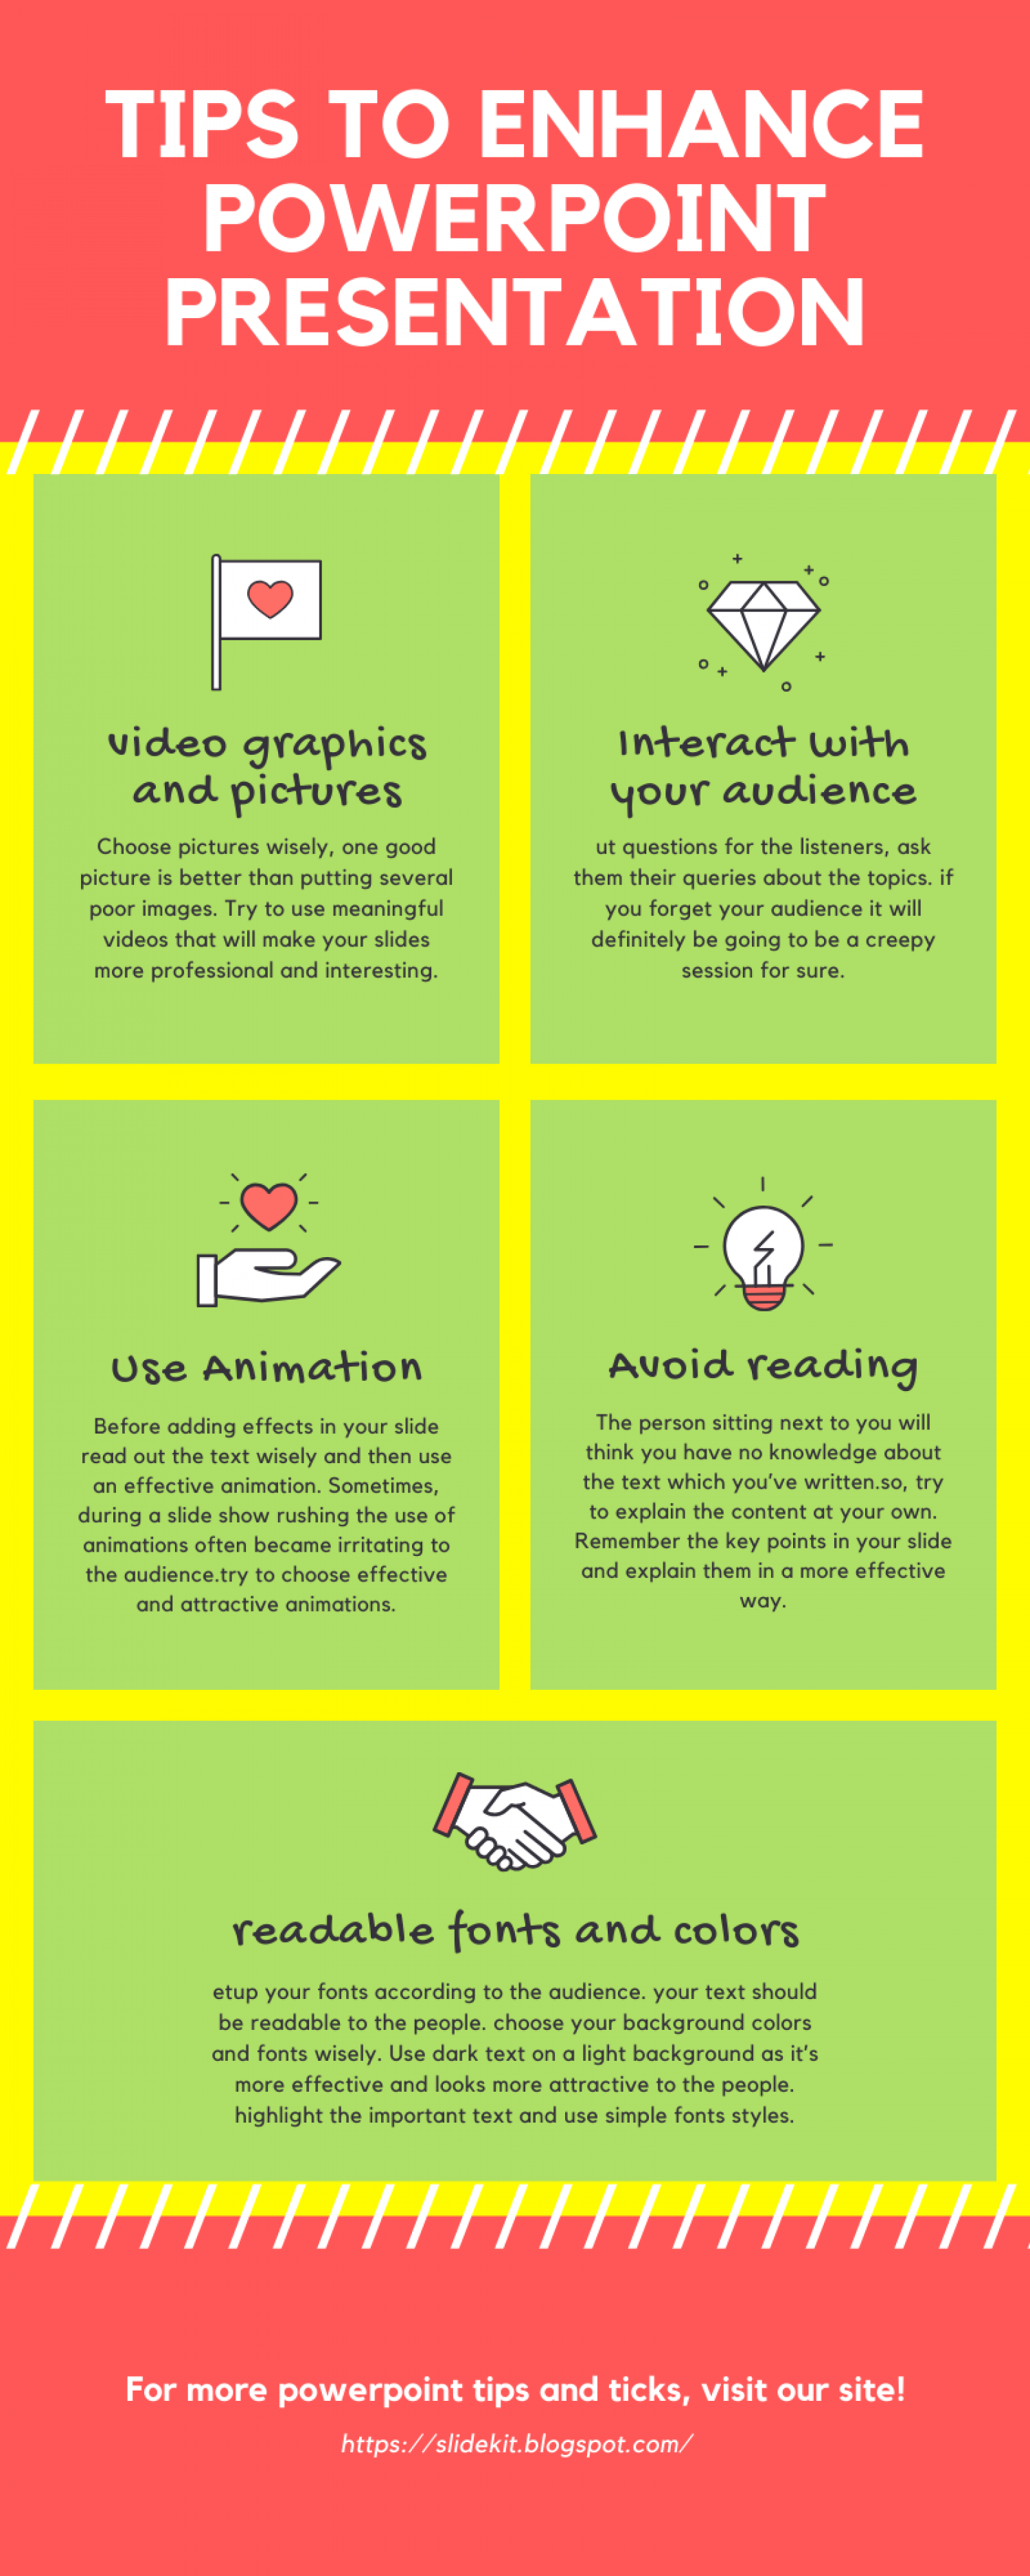 Tips to enhance PowerPoint presentation Infographic